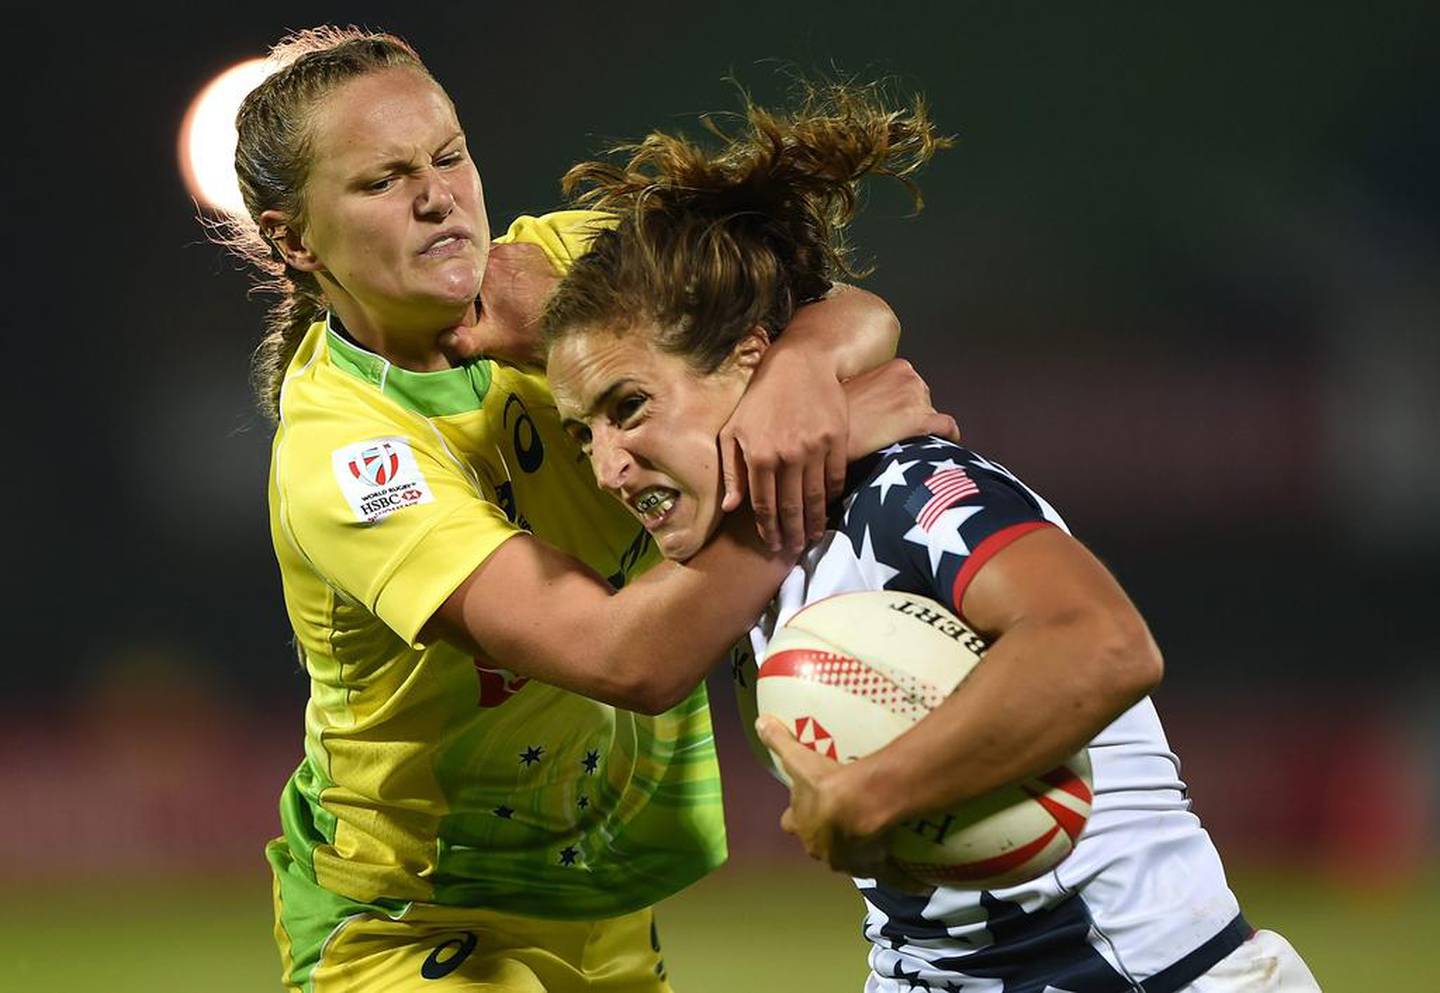 Ryan Carlyle of United States and Emma Sykes of Australia battle for the ball in the World Rugby Women’s Sevens in Dubai. Tom Dulat / Getty Images